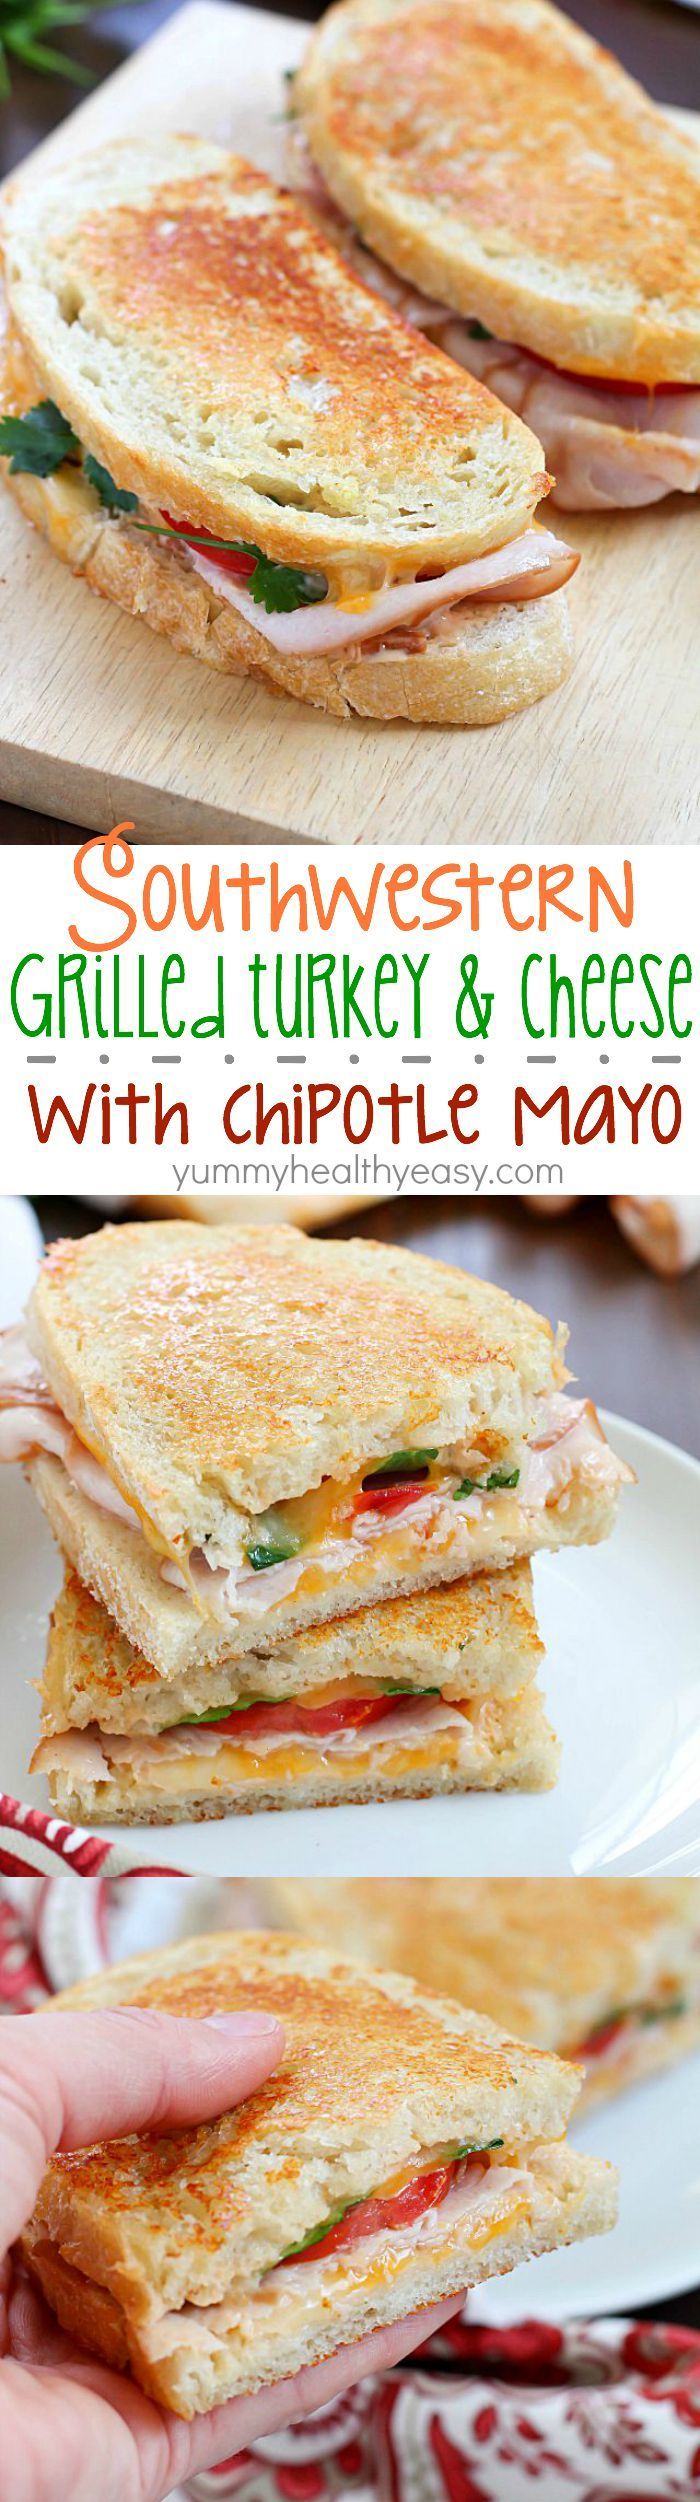 Incredibly delicious Grilled Turkey and Cheese sandwiches with a southwestern flair and homemade chipotle mayo. This is a turkey